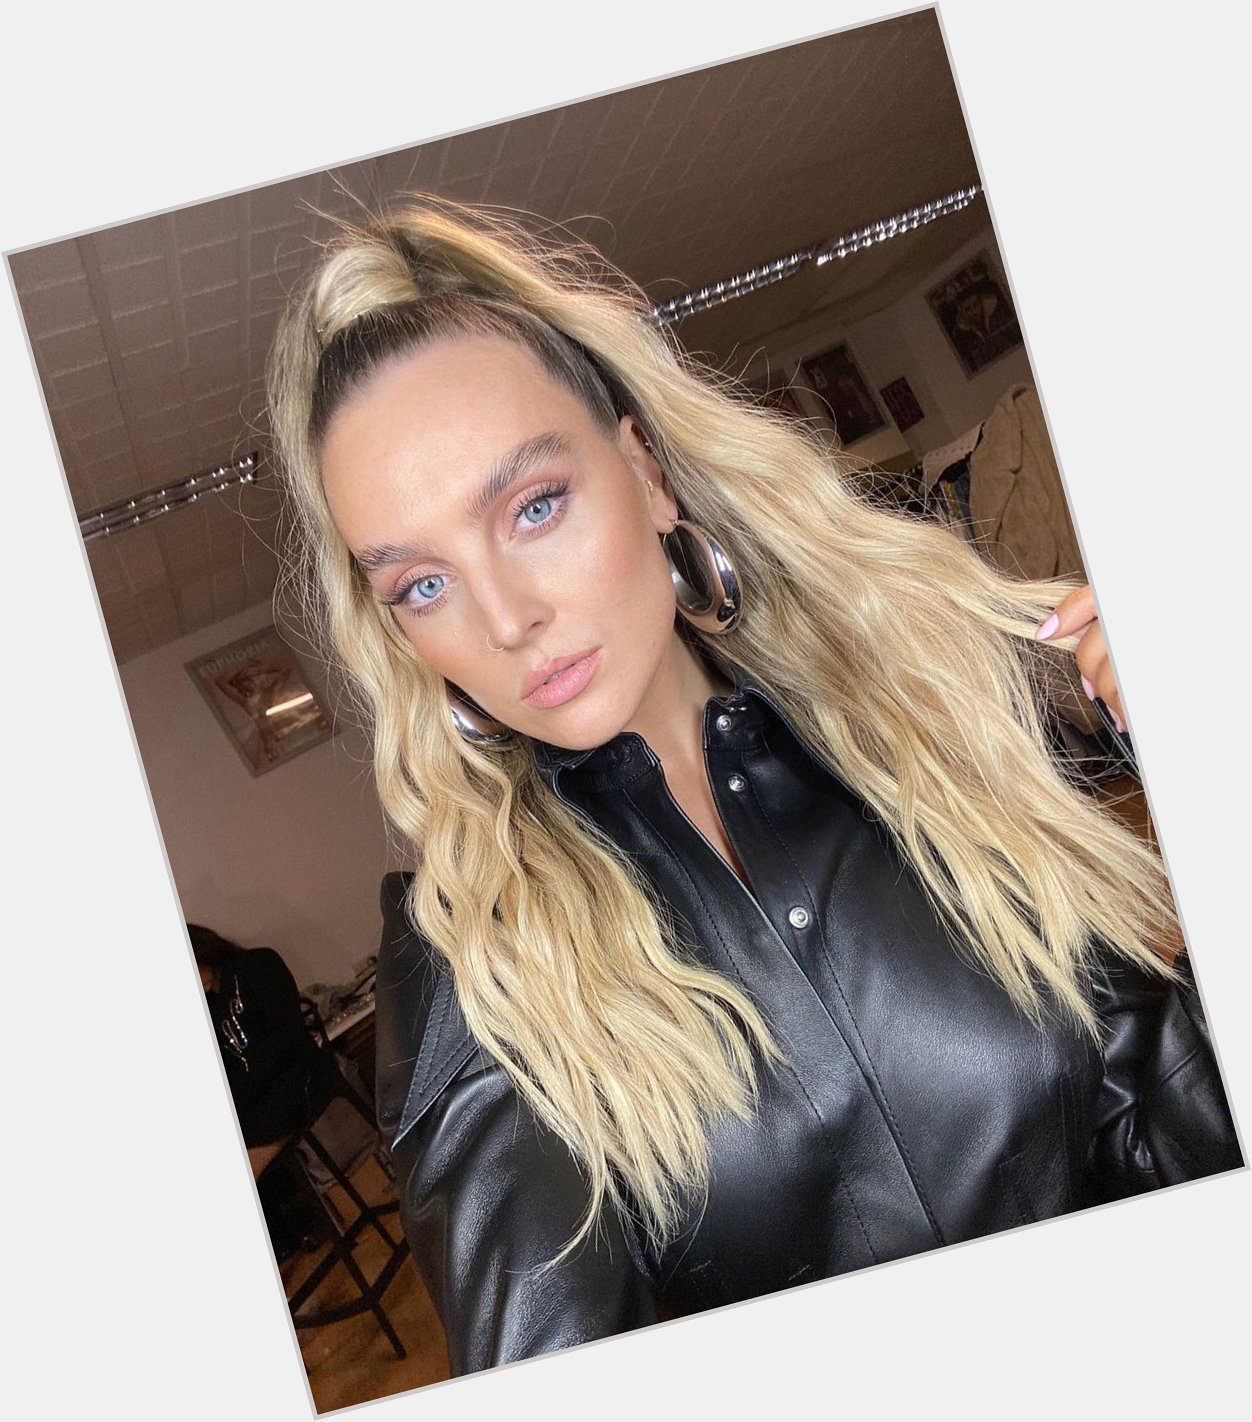 Happy BIRTHDAY to Perrie Edwards!  